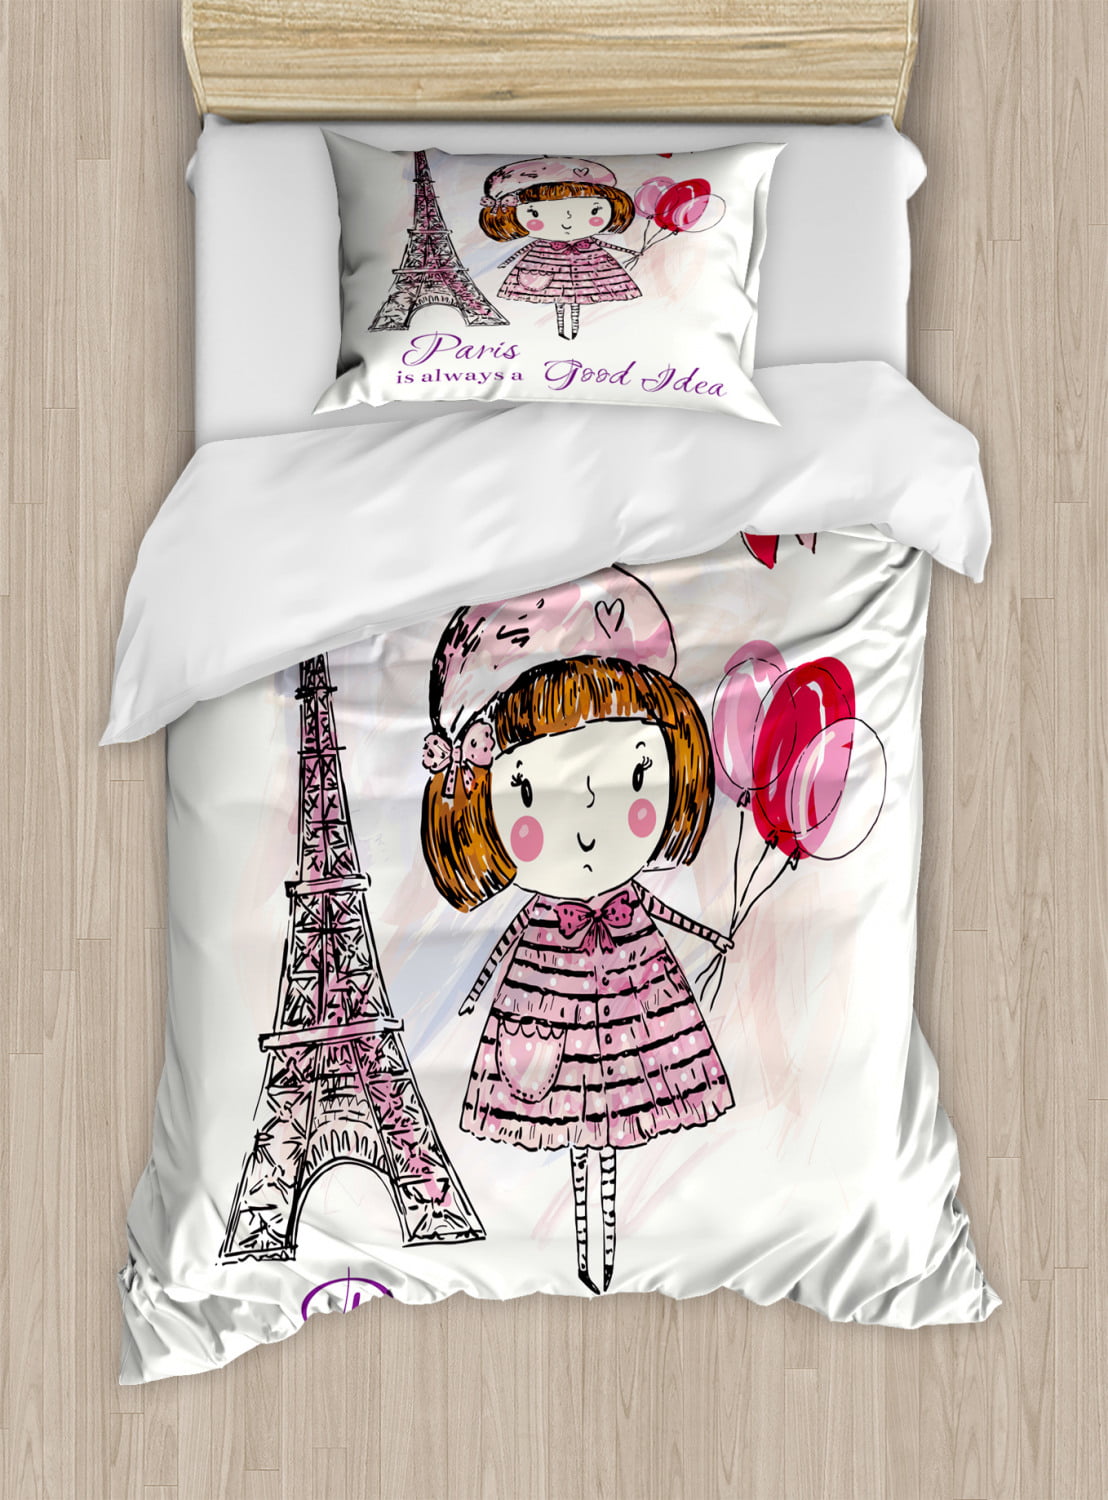 Decorative Printed 3 Piece Bedding Decor Set Pink Purple Little Girl Holding Balloons Hearts a Cloud and Eiffel Tower Illustration Ambesonne Paris Fitted Sheet & Pillow Sham Set Full 